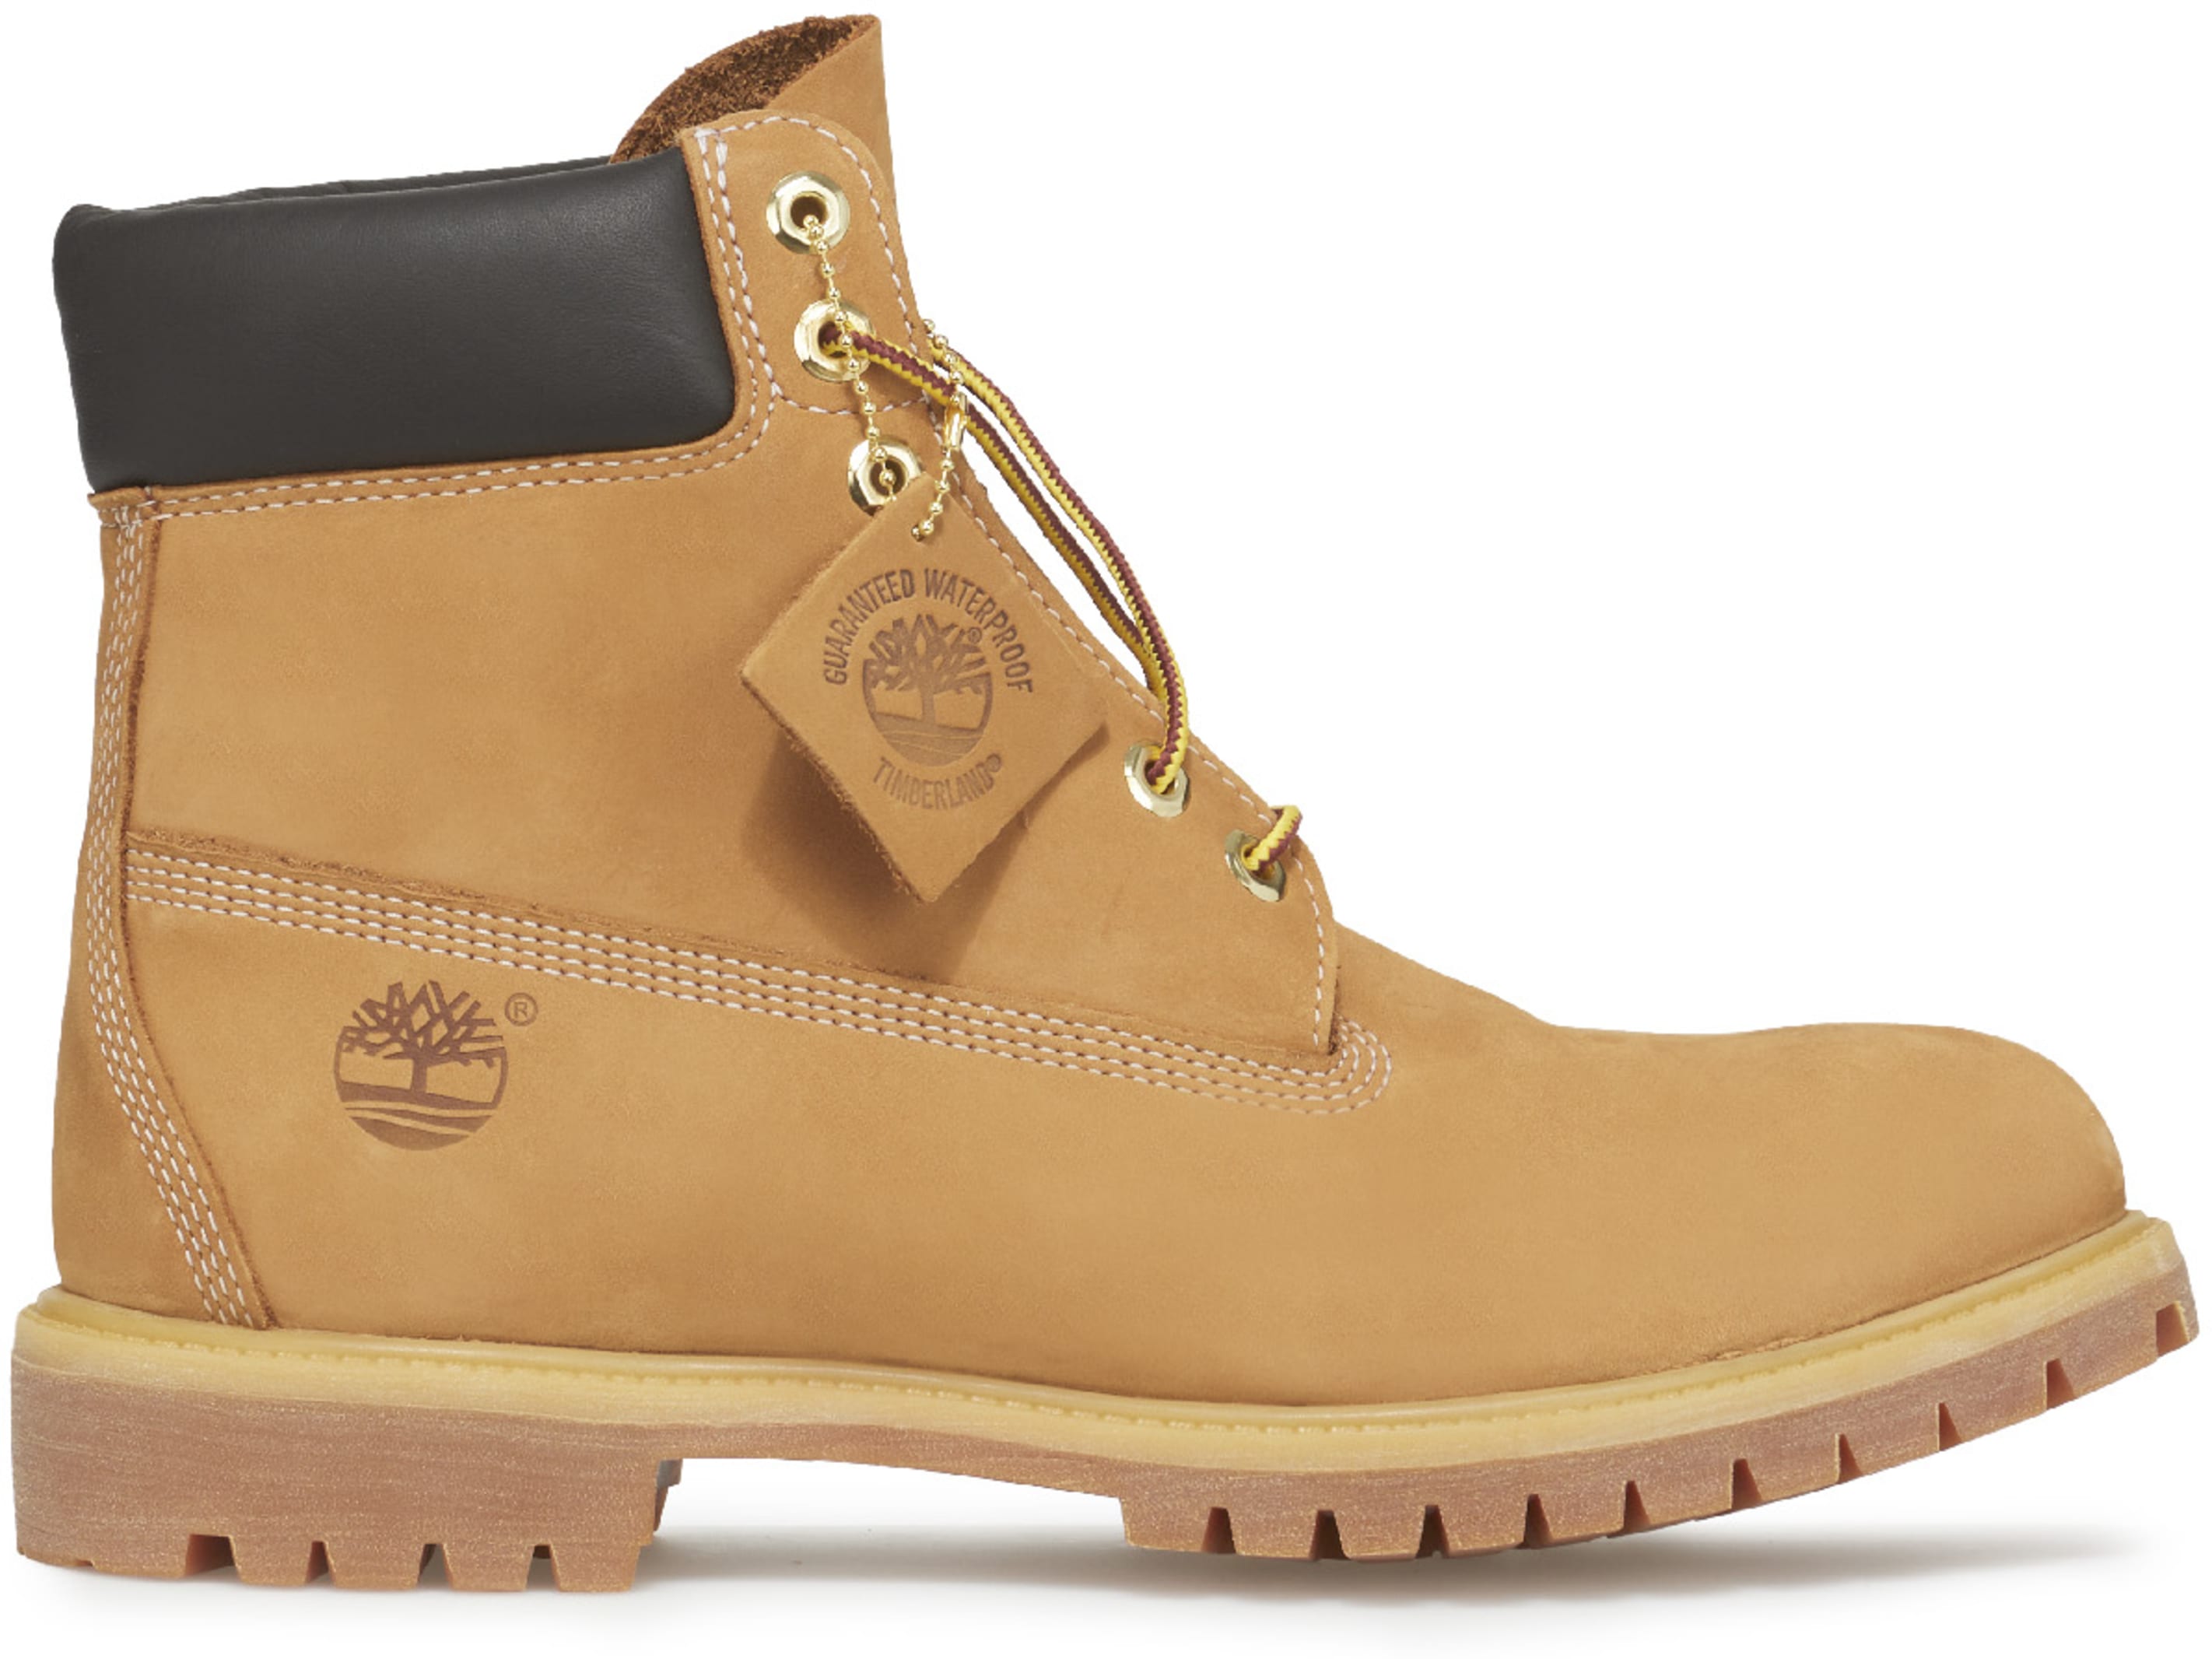 premium shearling 6 inch boot for men in yellow